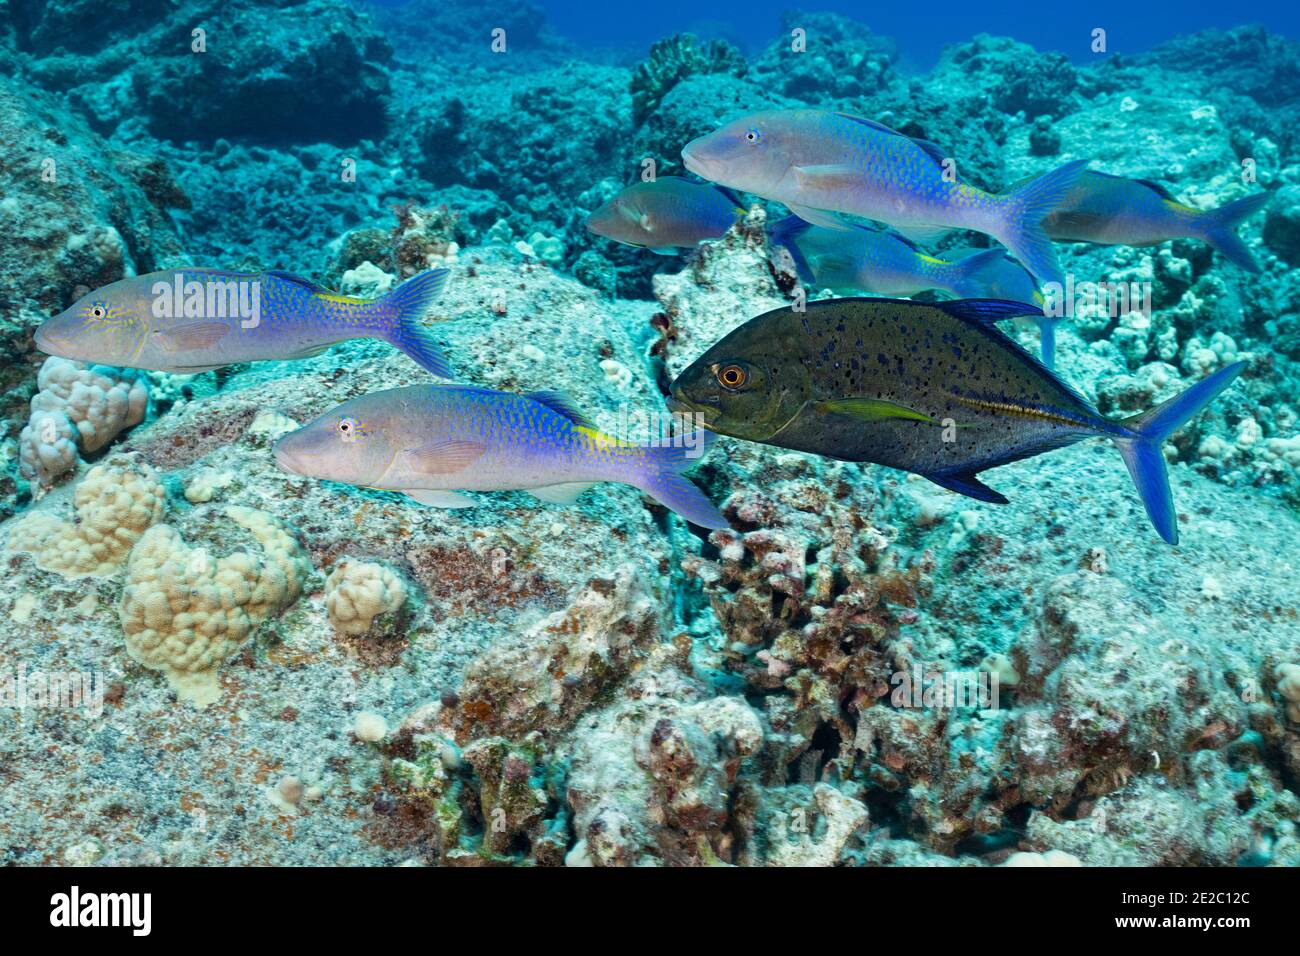 Hunting coalition of blue goatfish and bluefin jack; Jack has adopted a dark color phase, which may indicate aggression or territoriality; Kona,Hawaii Stock Photo